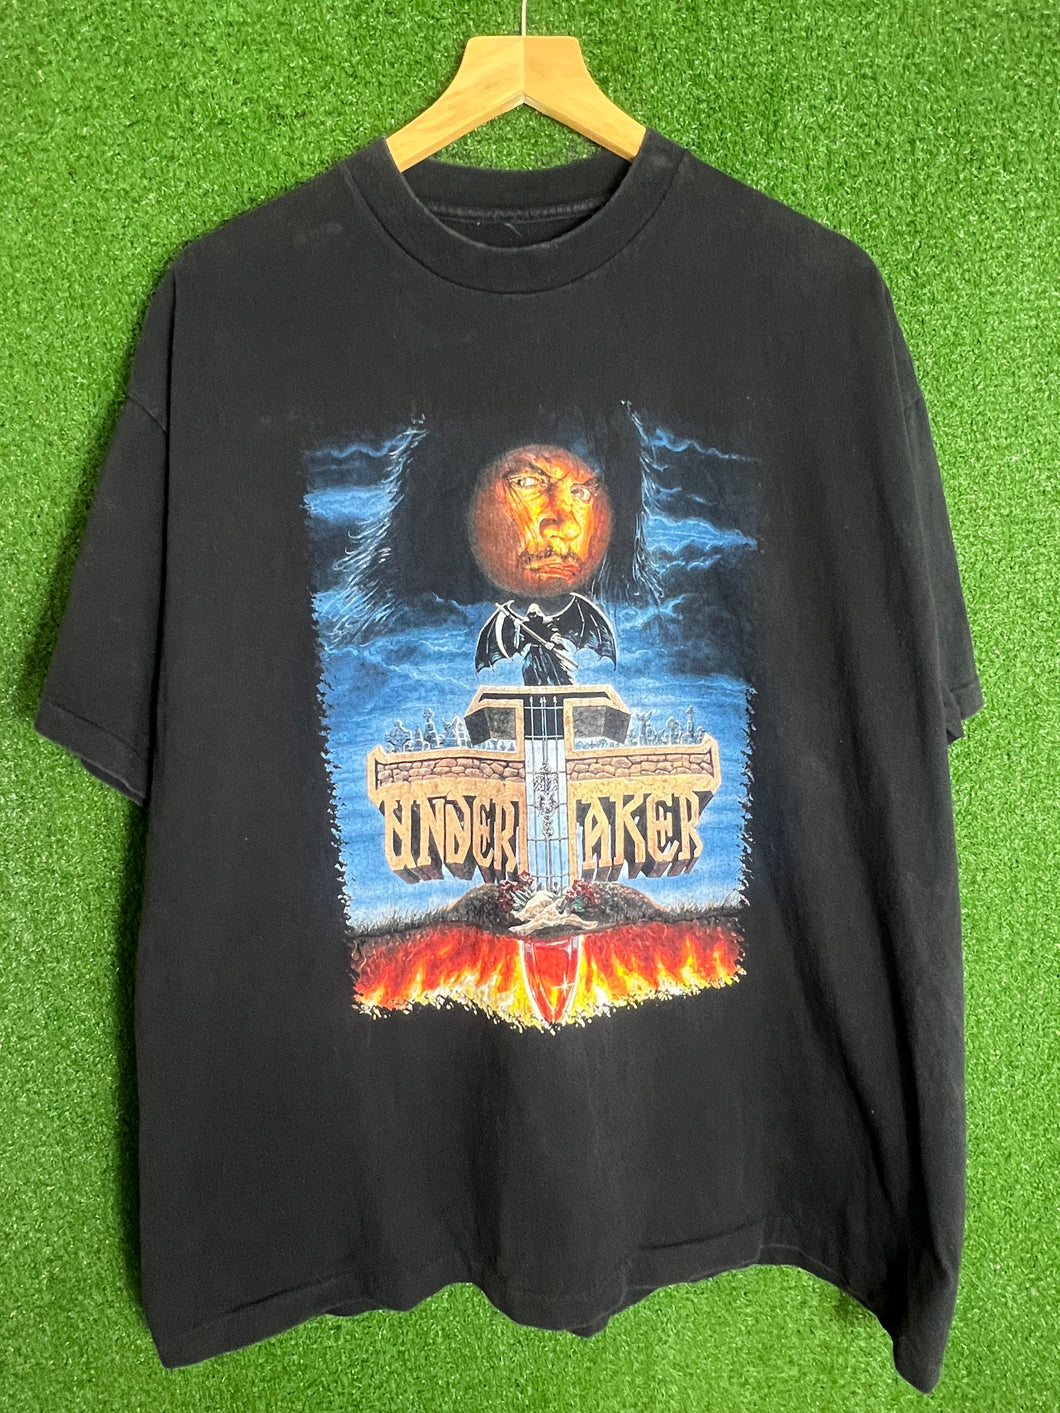 VTG Rare 1998 WWF Undertaker To Hell and Back Shirt Size XL